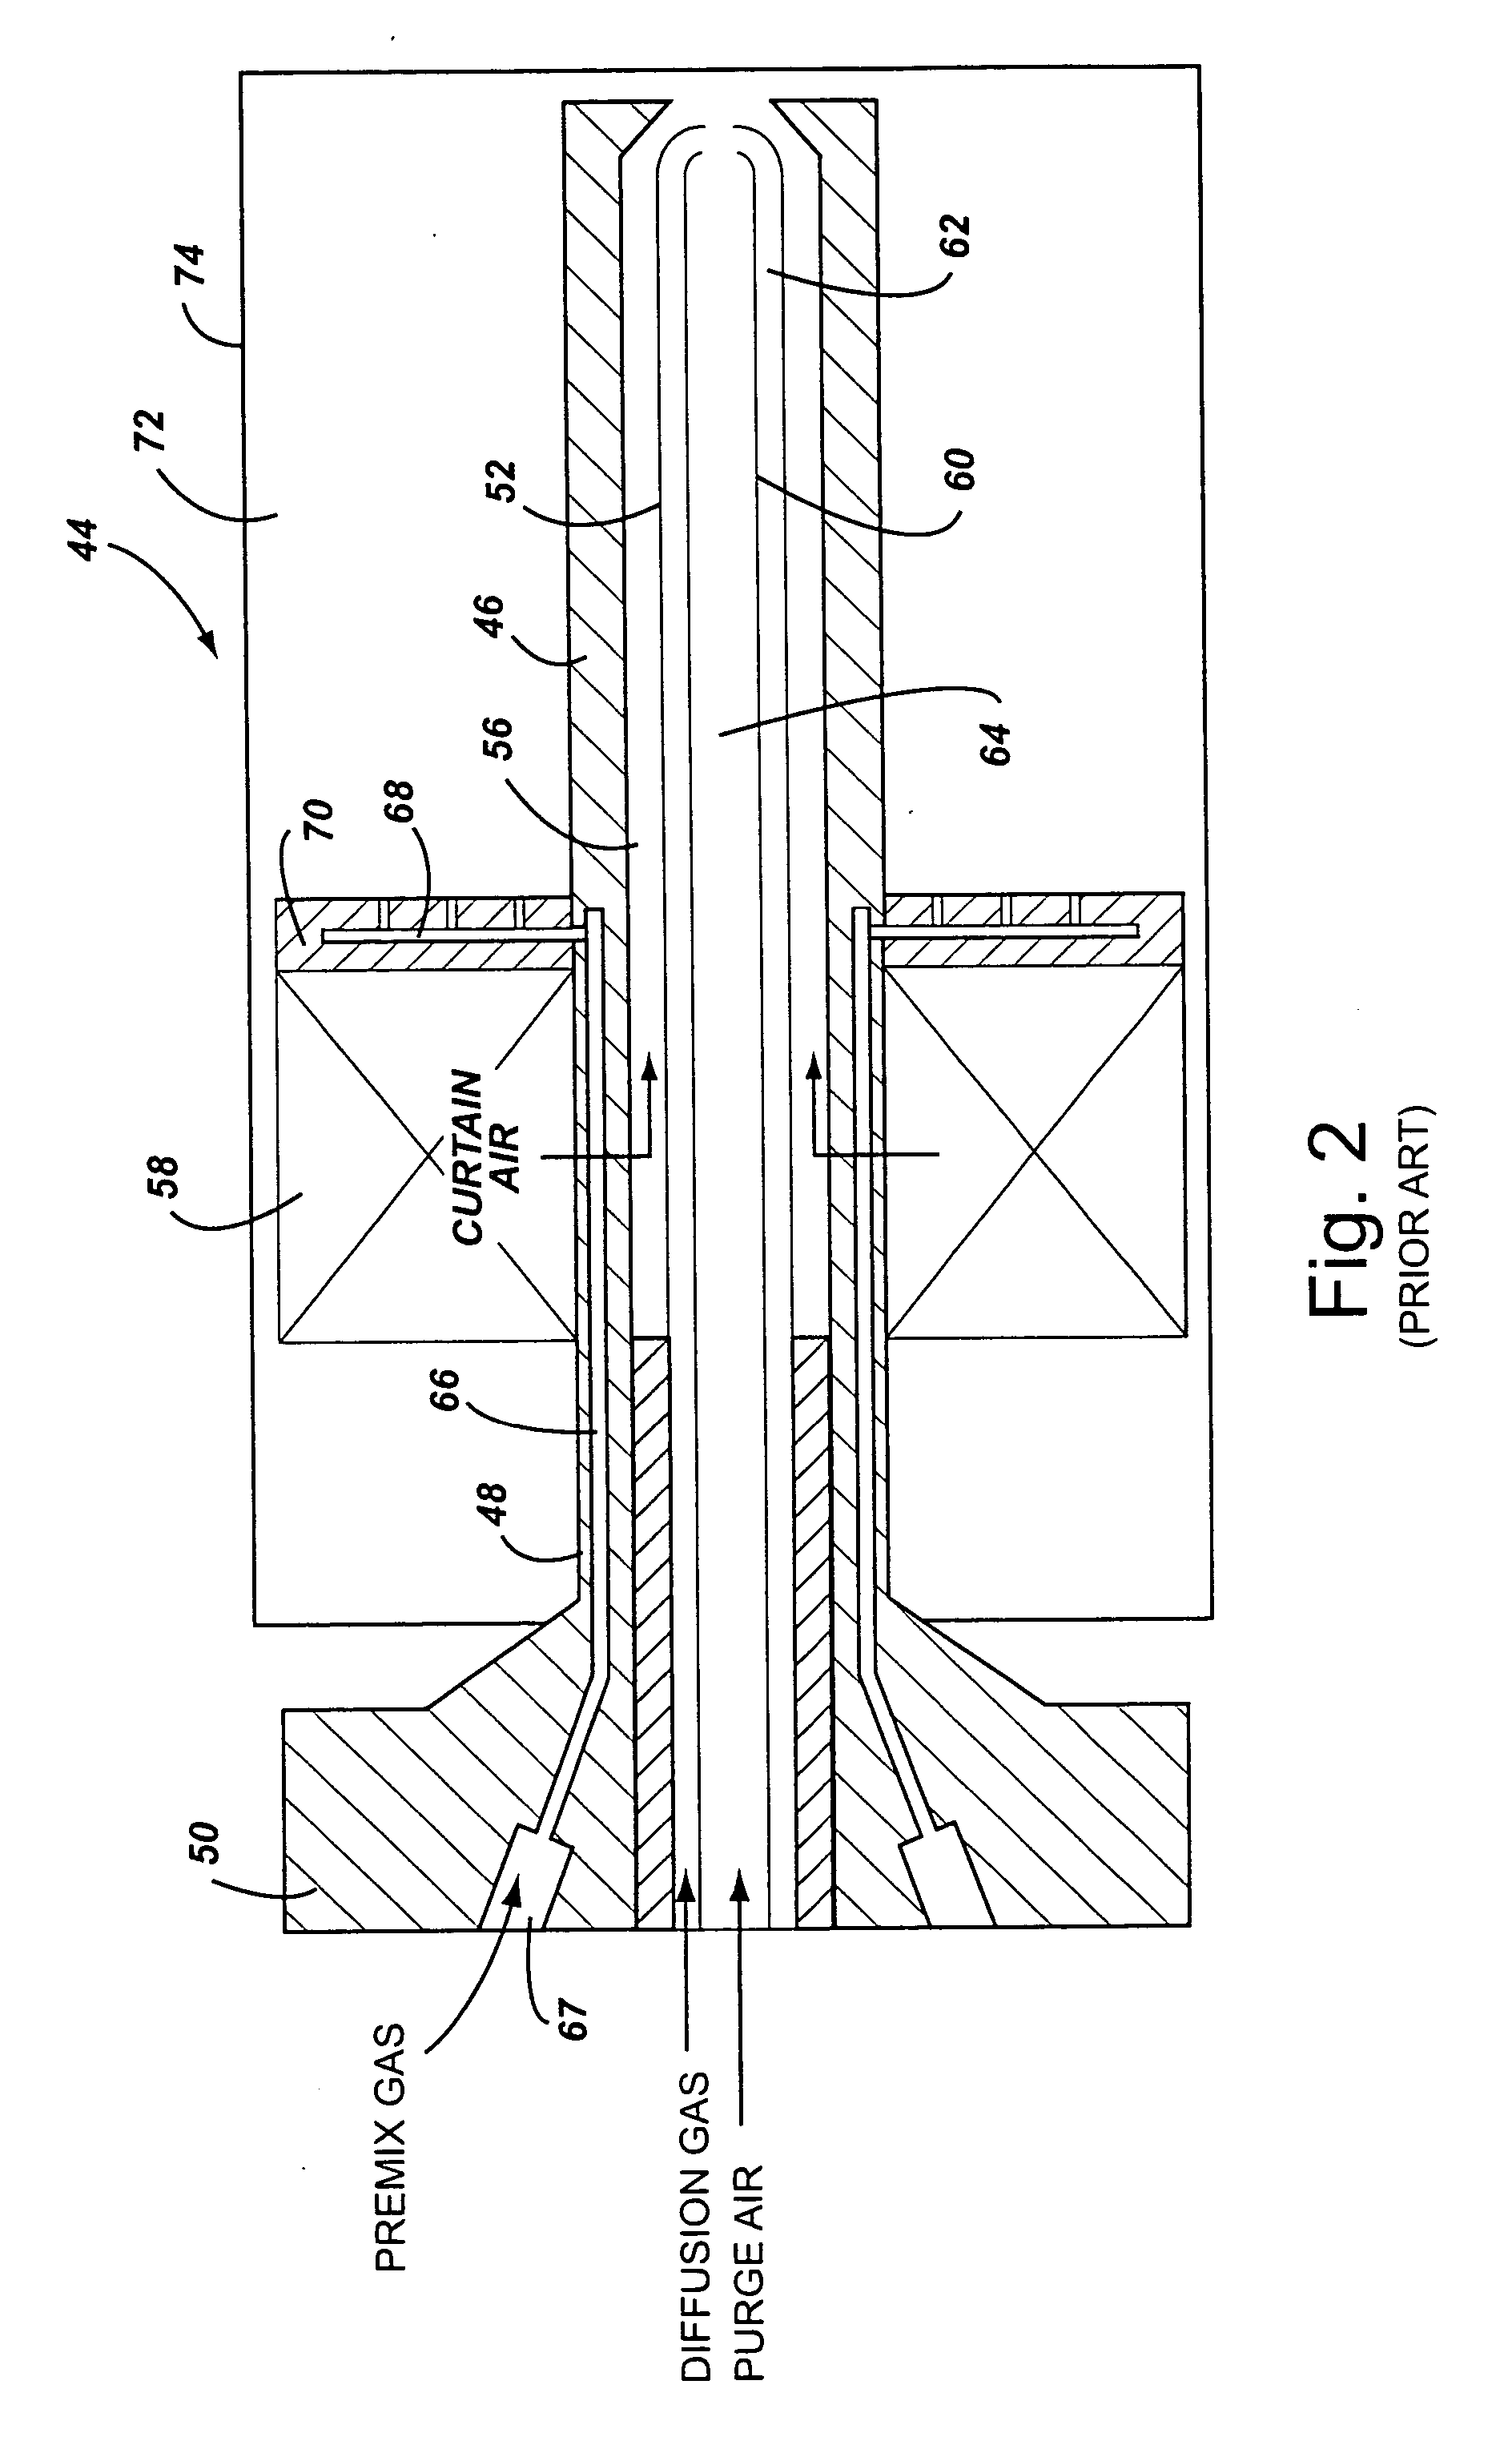 Low-cost dual-fuel combustor and related method